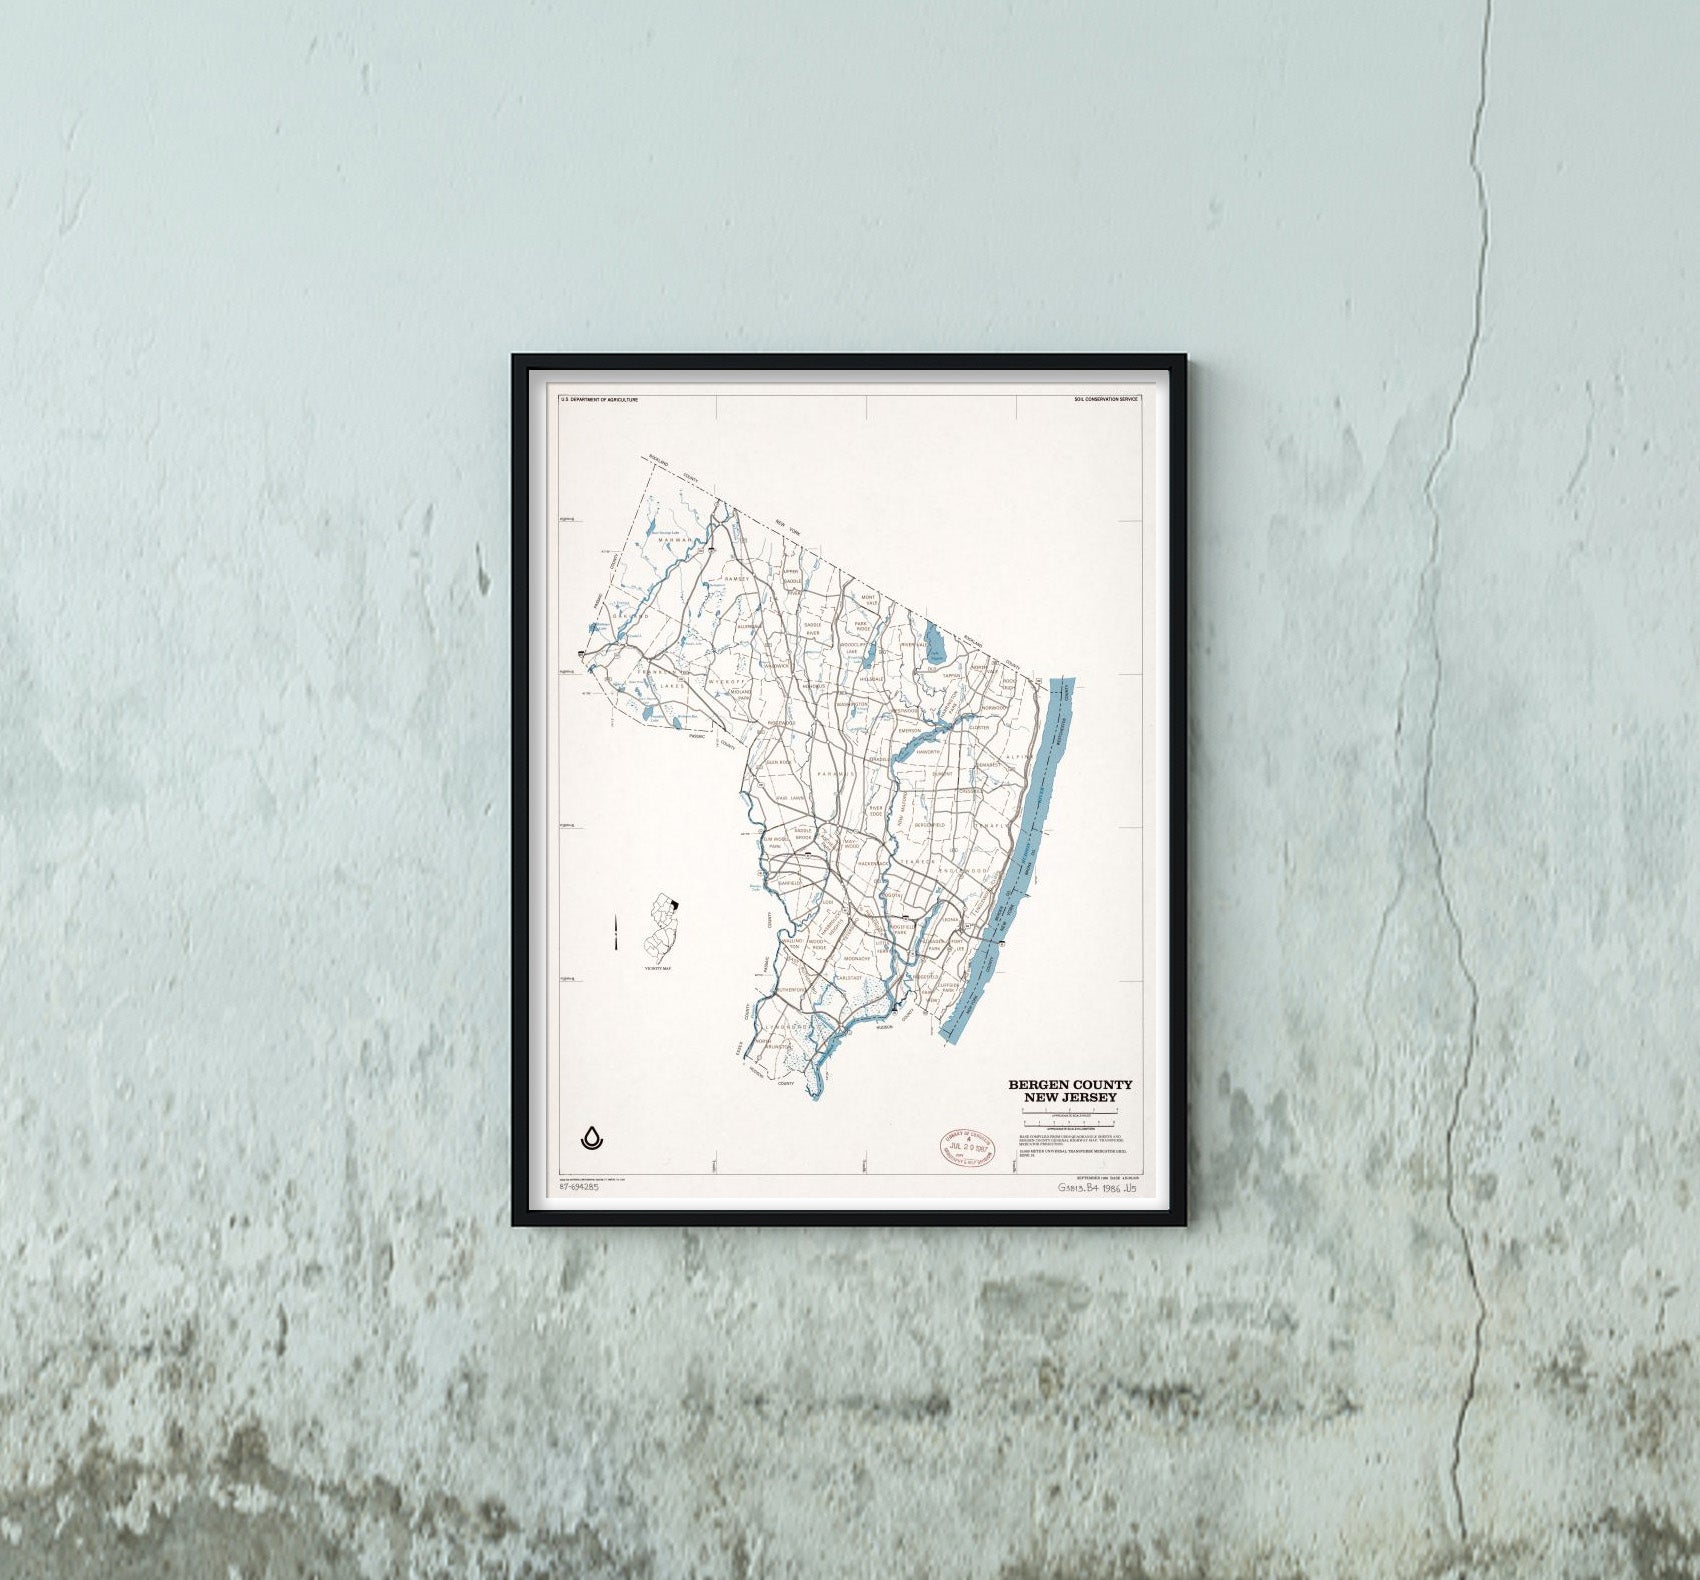 1986 Map|Title: Bergen County, New Jersey|Subject: Bergen County|Bergen County N